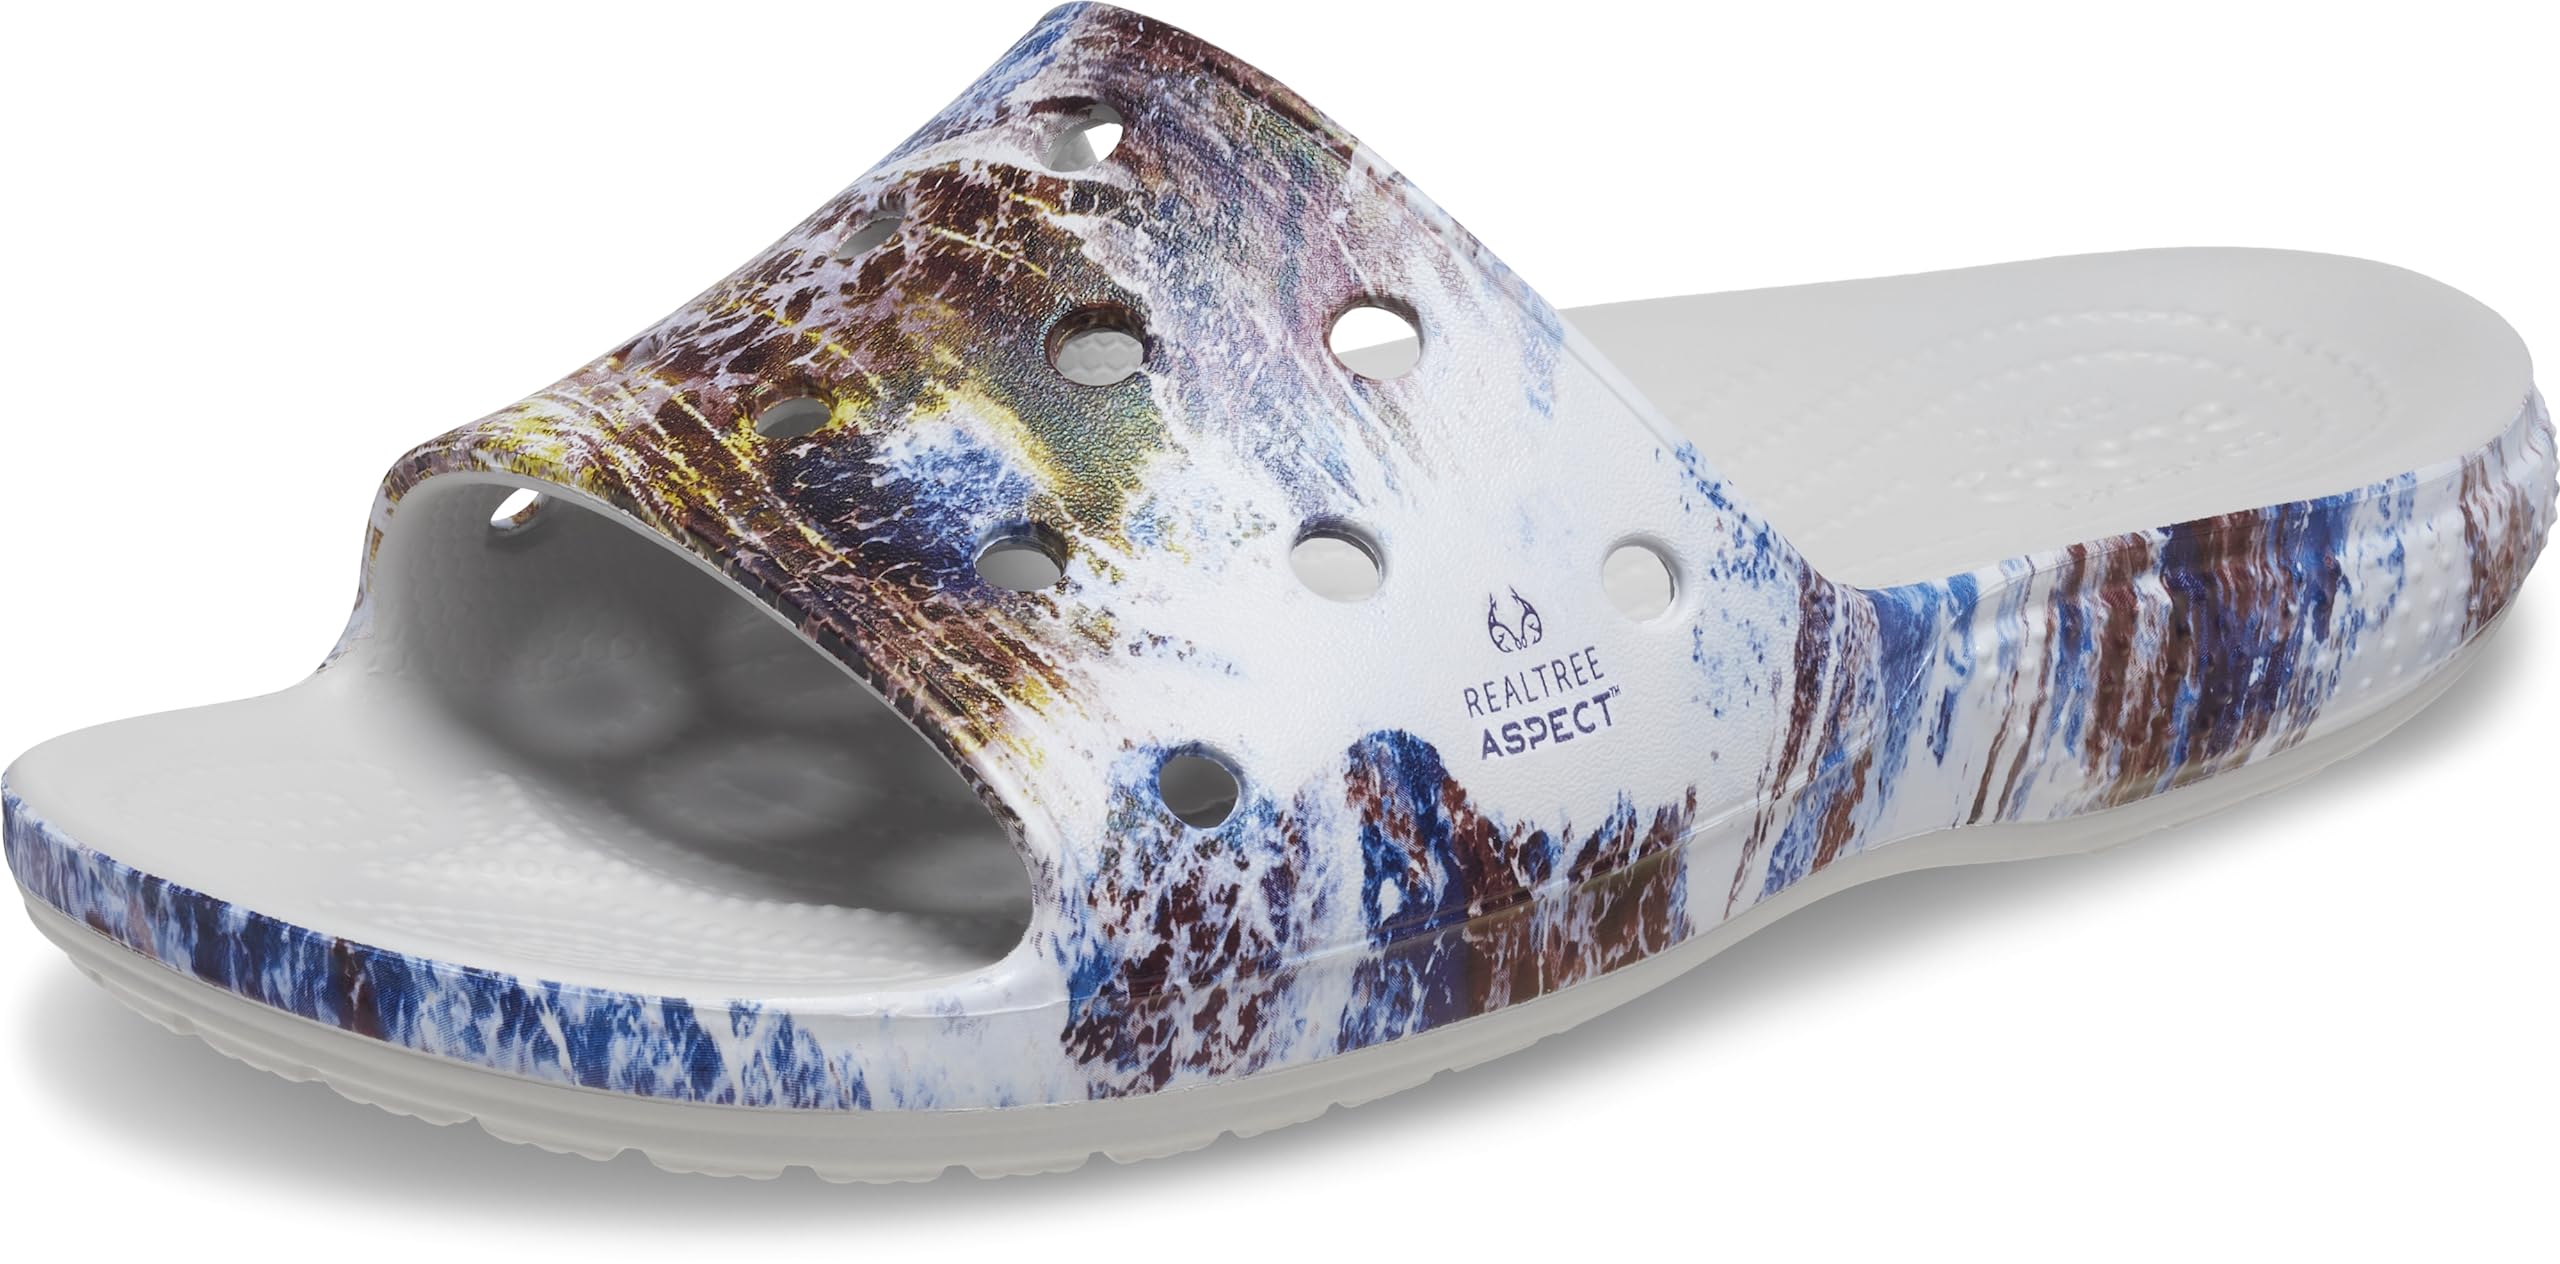 Crocs Unisex-Adult Classic Camo Slides Sandal (Atmosphere) $12.88 + Free Shipping w/ Prime or on $35+